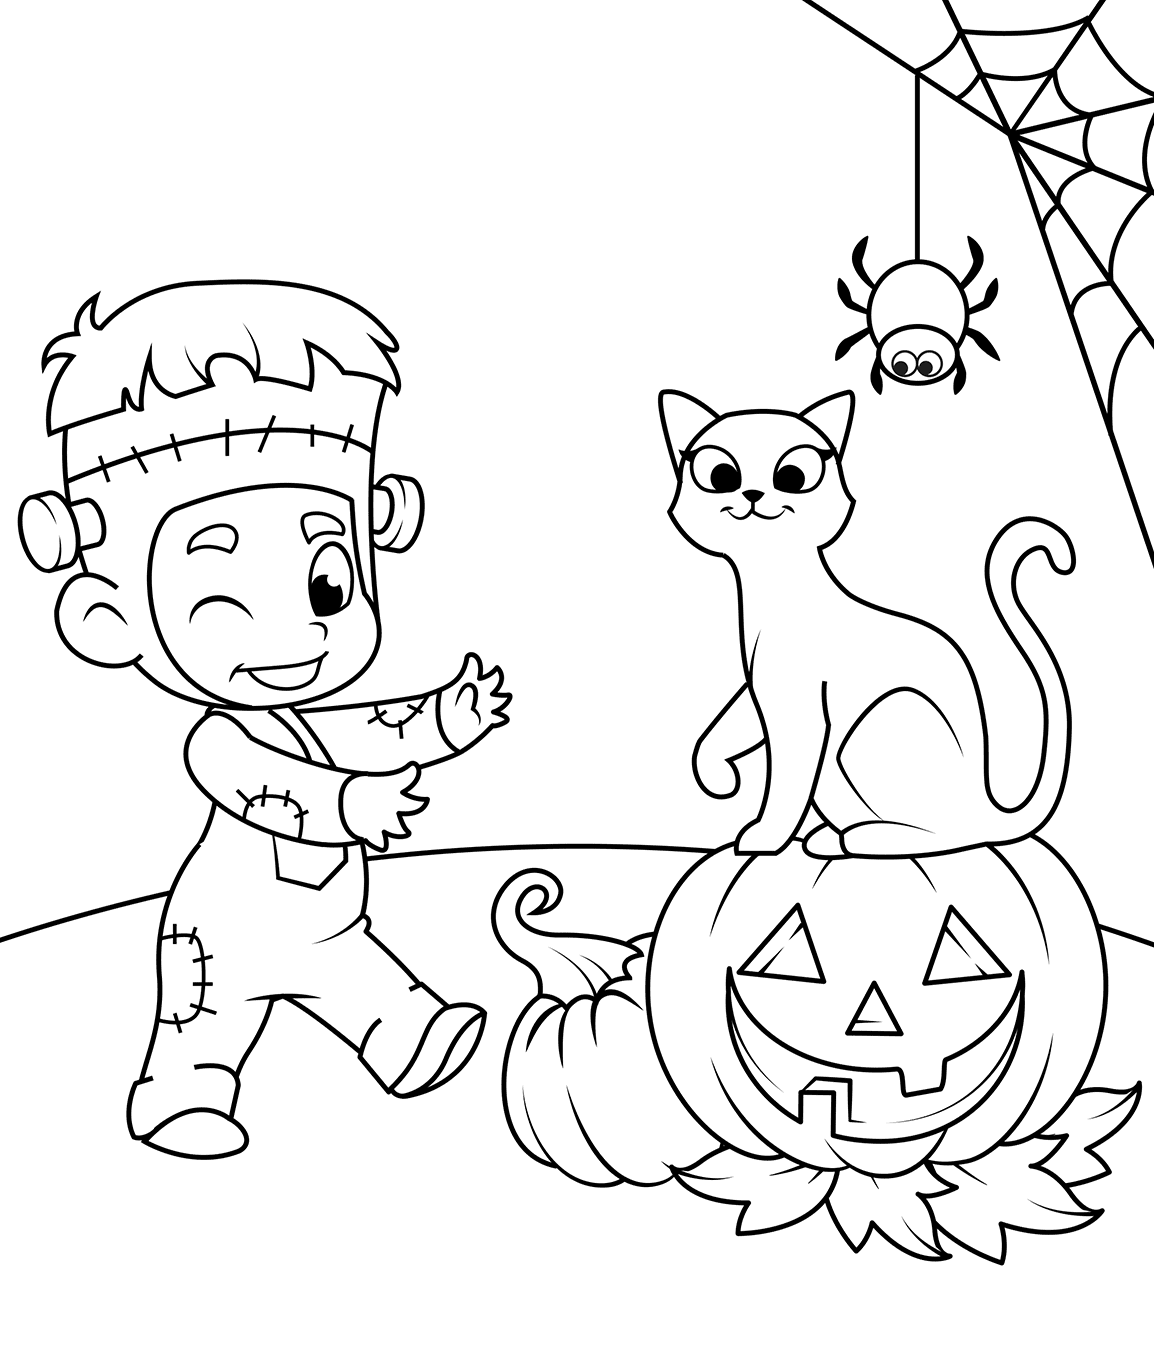 Cute Kid In A Costume With A Cat And Jack O Lantern Halloween Coloring Page